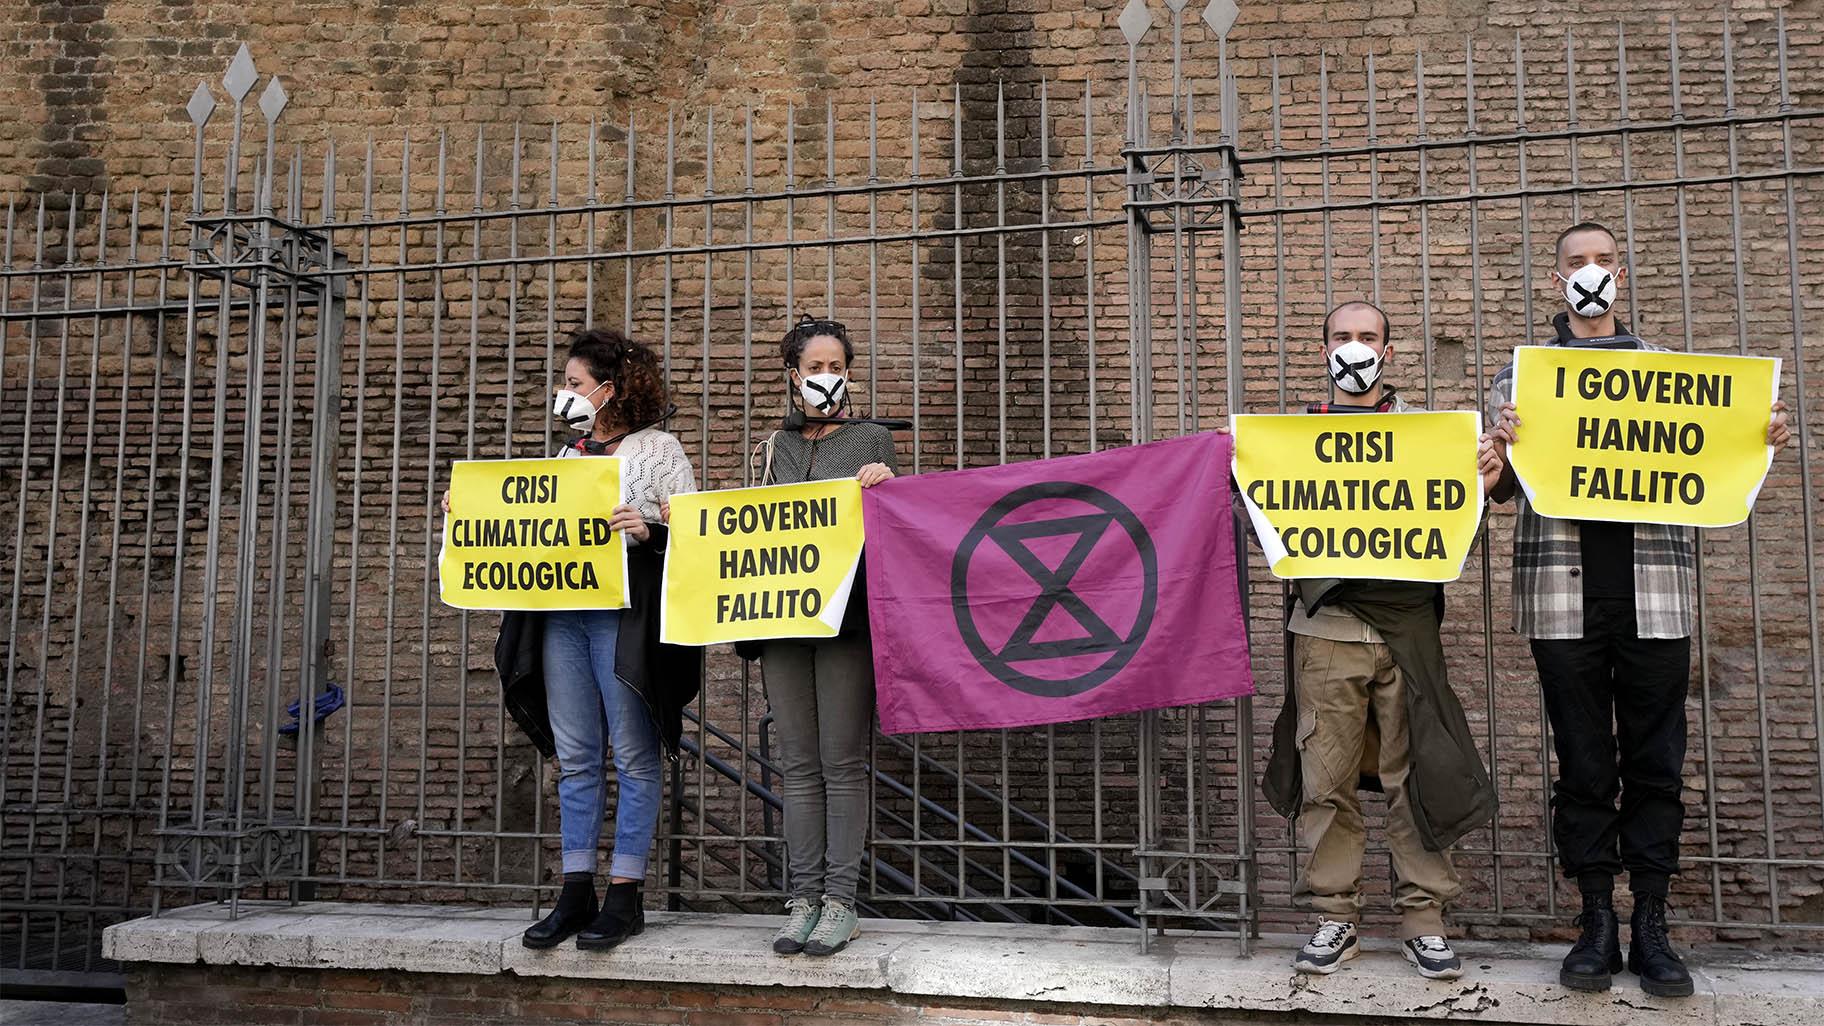 Activists from Extinction Rebellion use bike locks to chain themselves to a fence while holding signs during a demonstration outside the G20 summit in Rome, Sunday, Oct. 31, 2021.  (AP Photo / Luca Bruno)